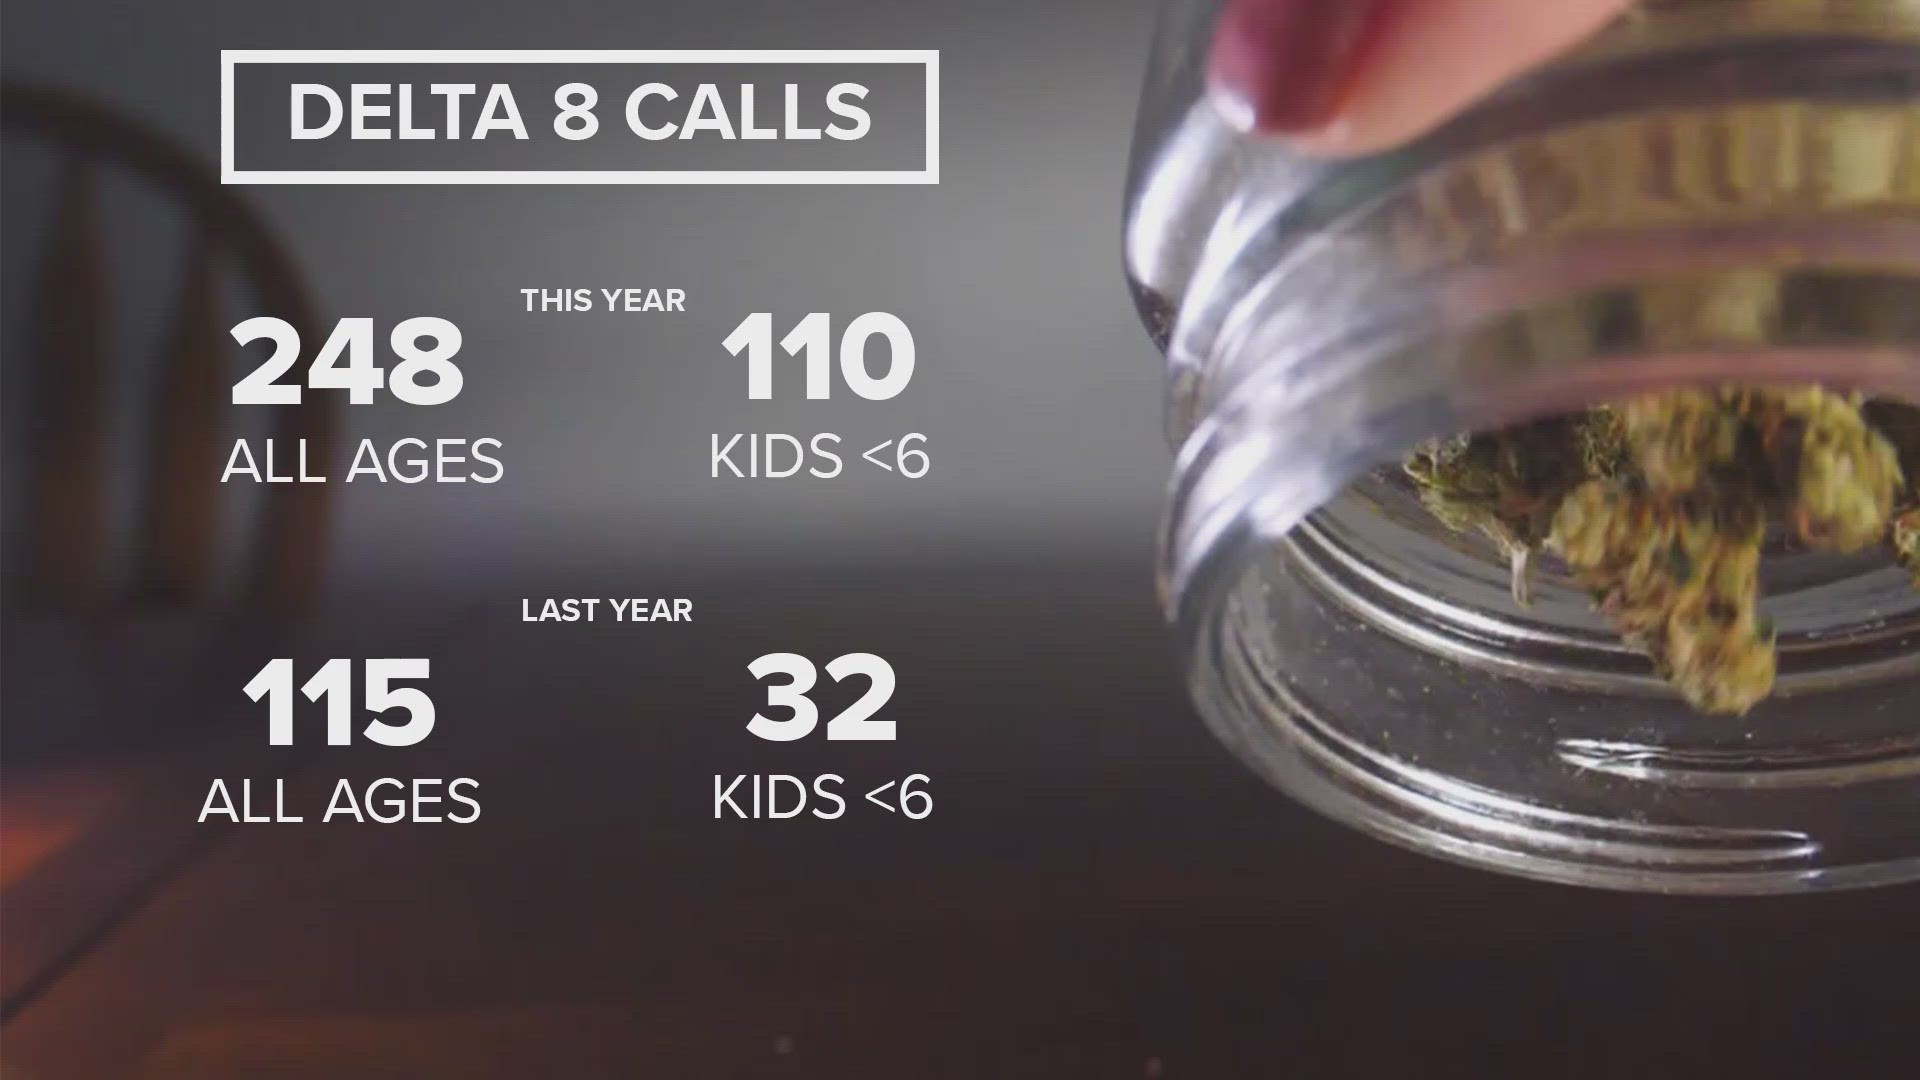 Dr. Rebecca Bruccoleri said they received about 110 calls about children under 6 exposed to delta-8. That's more than three times as many as the year prior.